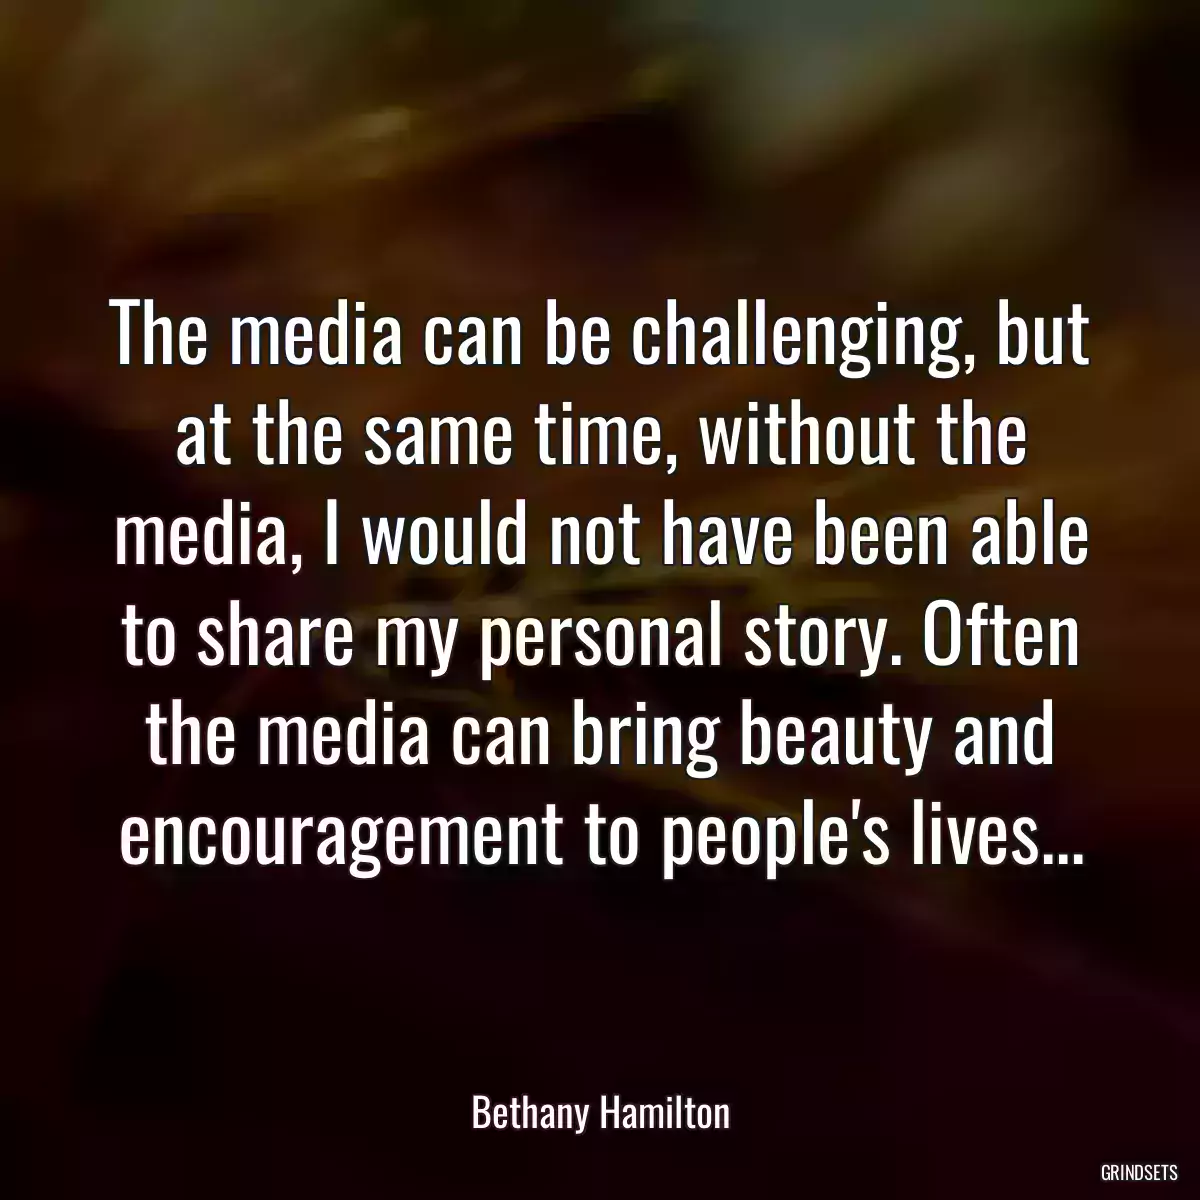 The media can be challenging, but at the same time, without the media, I would not have been able to share my personal story. Often the media can bring beauty and encouragement to people\'s lives...